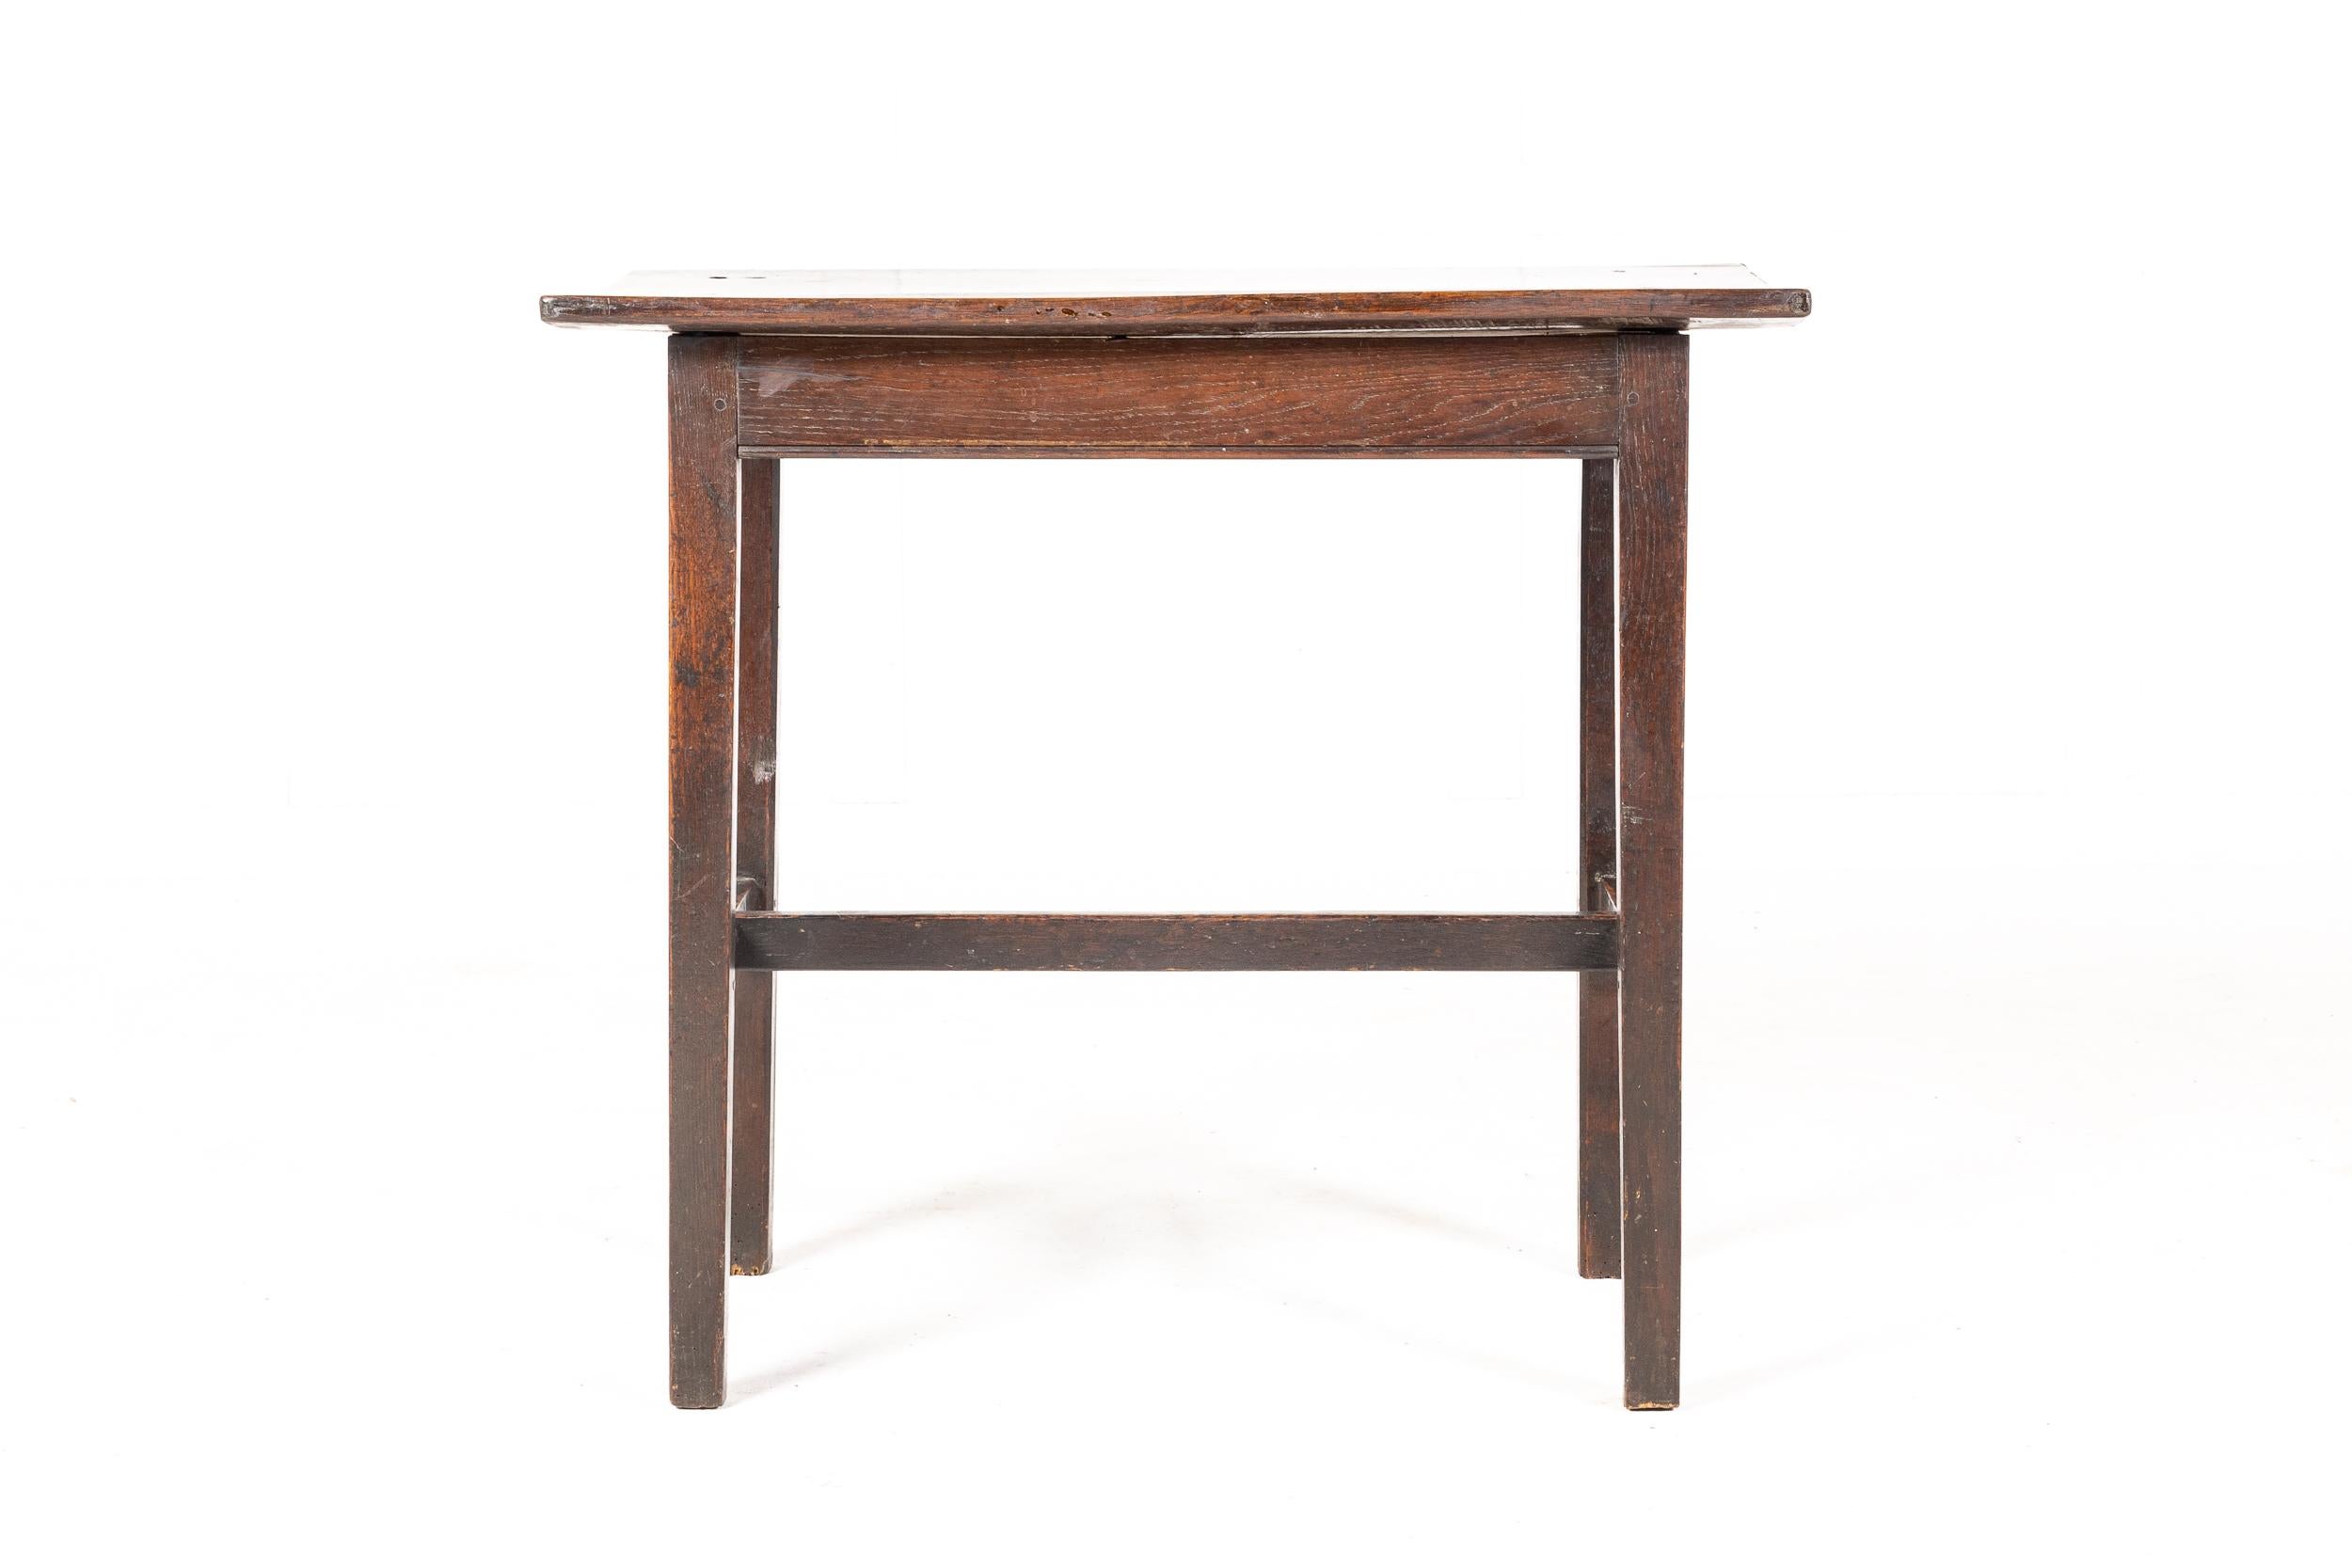 An unusual mid-18th century oak centre table/tavern table with a two plank top. Having a simple, traditional frieze raised on square tapering legs united by an unusually high H-stretcher.
A practical, nice sized table with wonderful colour and